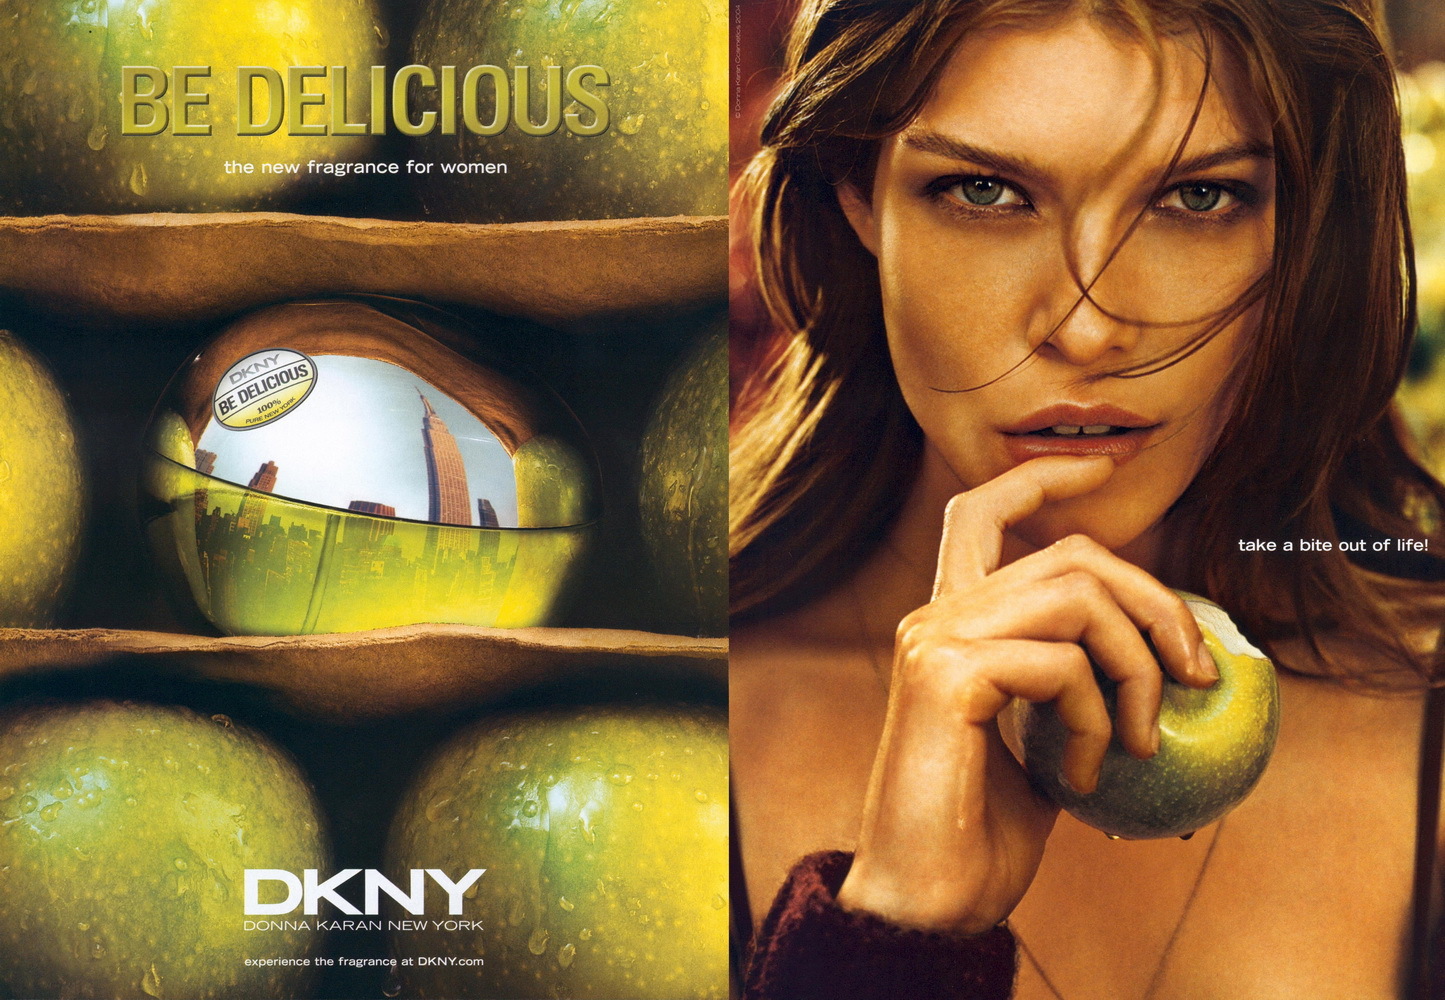 Bite out of life. DKNY be delicious Donna Karan Парфюм. Donna Karan DKNY be delicious Lady. Donna Karan DKNY be delicious, EDP, 100 ml. DKNY - be delicious w.